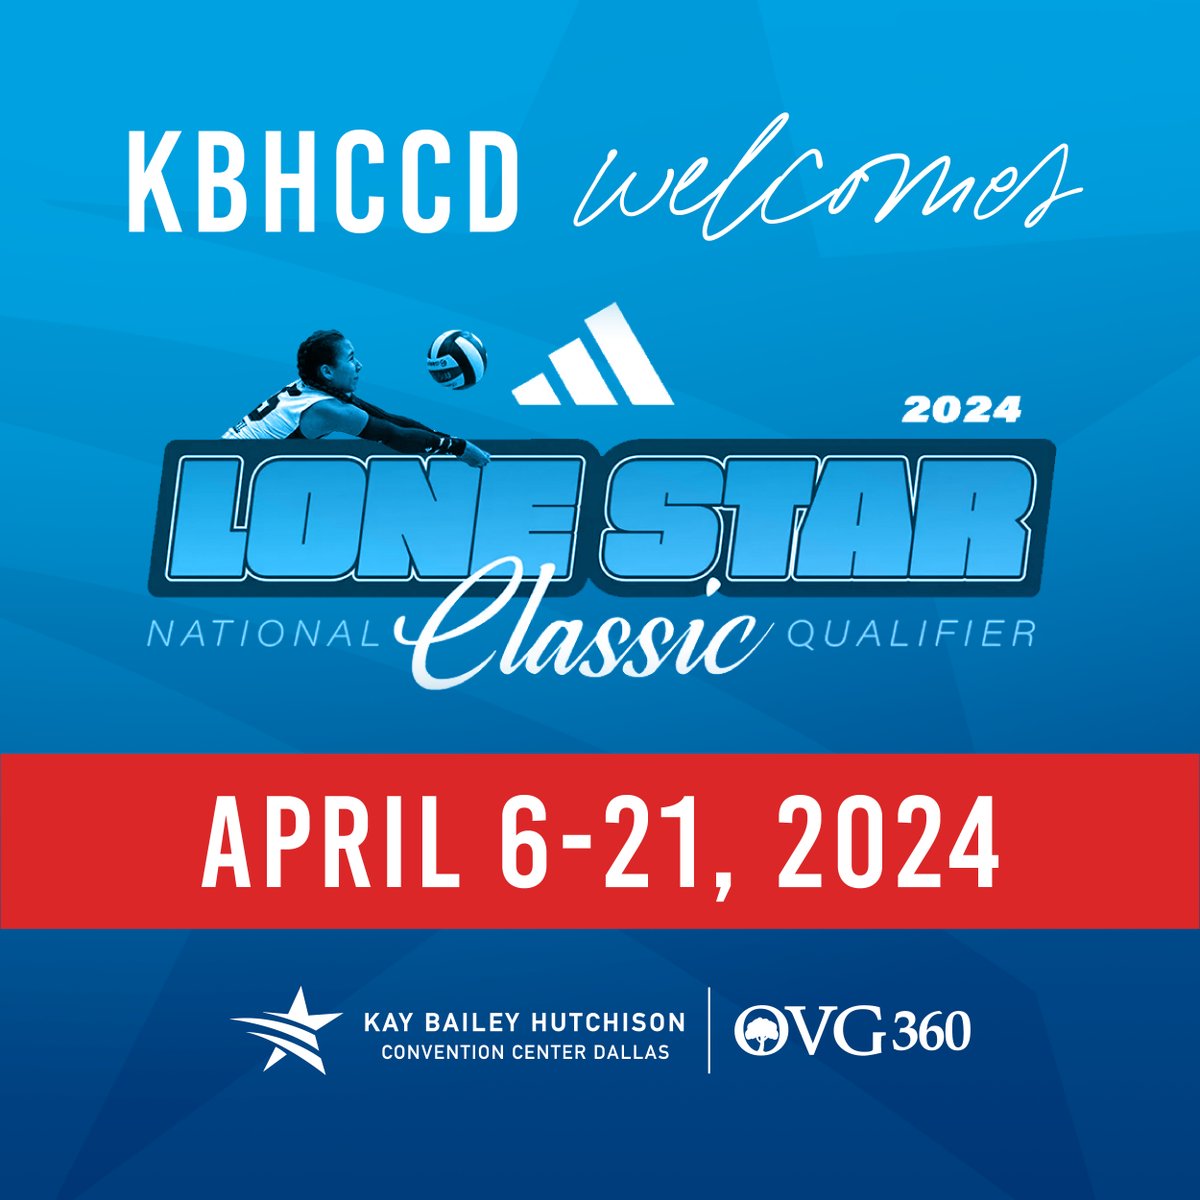 The @adidas @LoneStarClassic is about to serve up three weekends of non-stop volleyball action! 🏐🔥 Grab your tickets at bit.ly/LSC2024Tickets, and let the games begin! 🎉 #LSC24 | W1: 4/6-8 | W2: 4/13-15 | W3: 4/19-21 | Retail/Concessions Menu🍴: bit.ly/LSC2024Menu